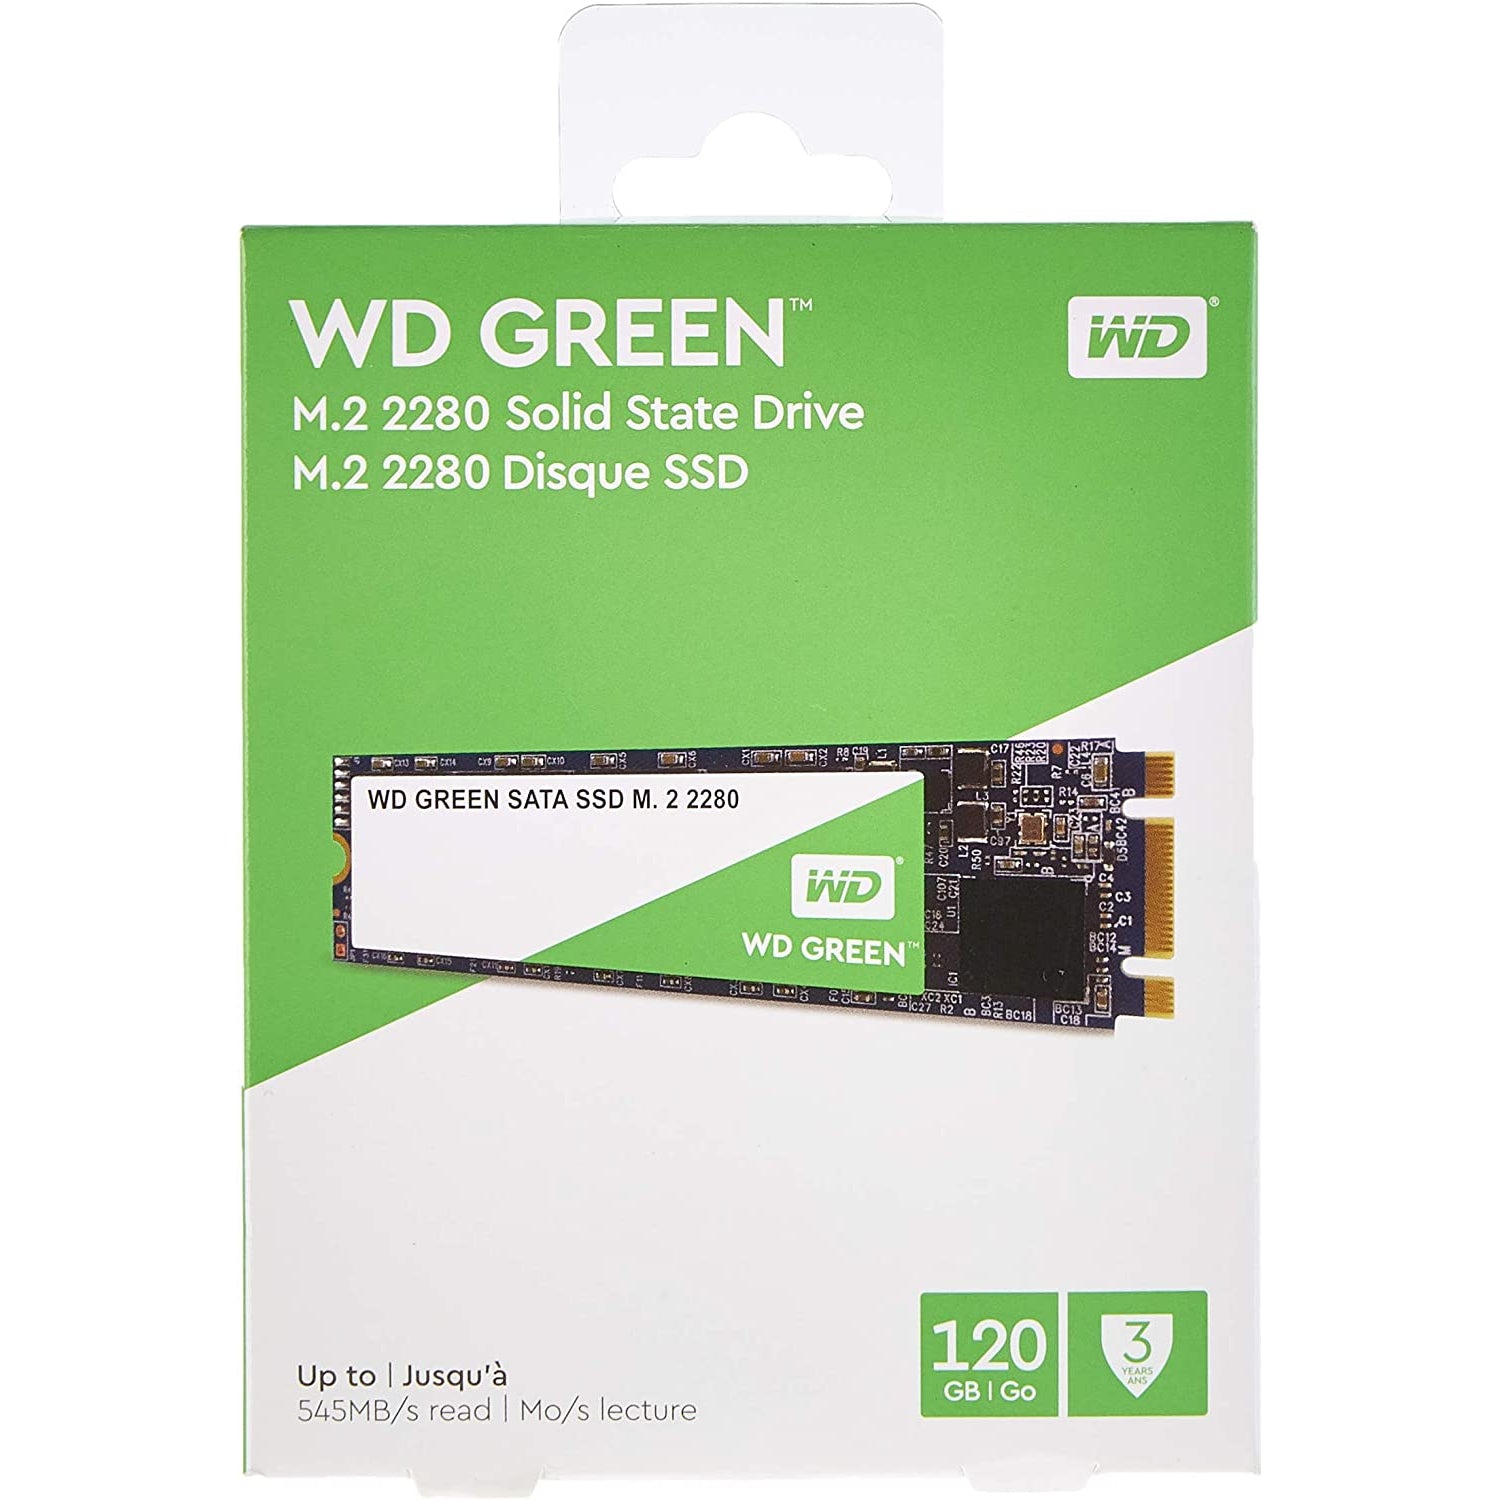 WD GREEN M.2 2280 Solid State Drive 120GB